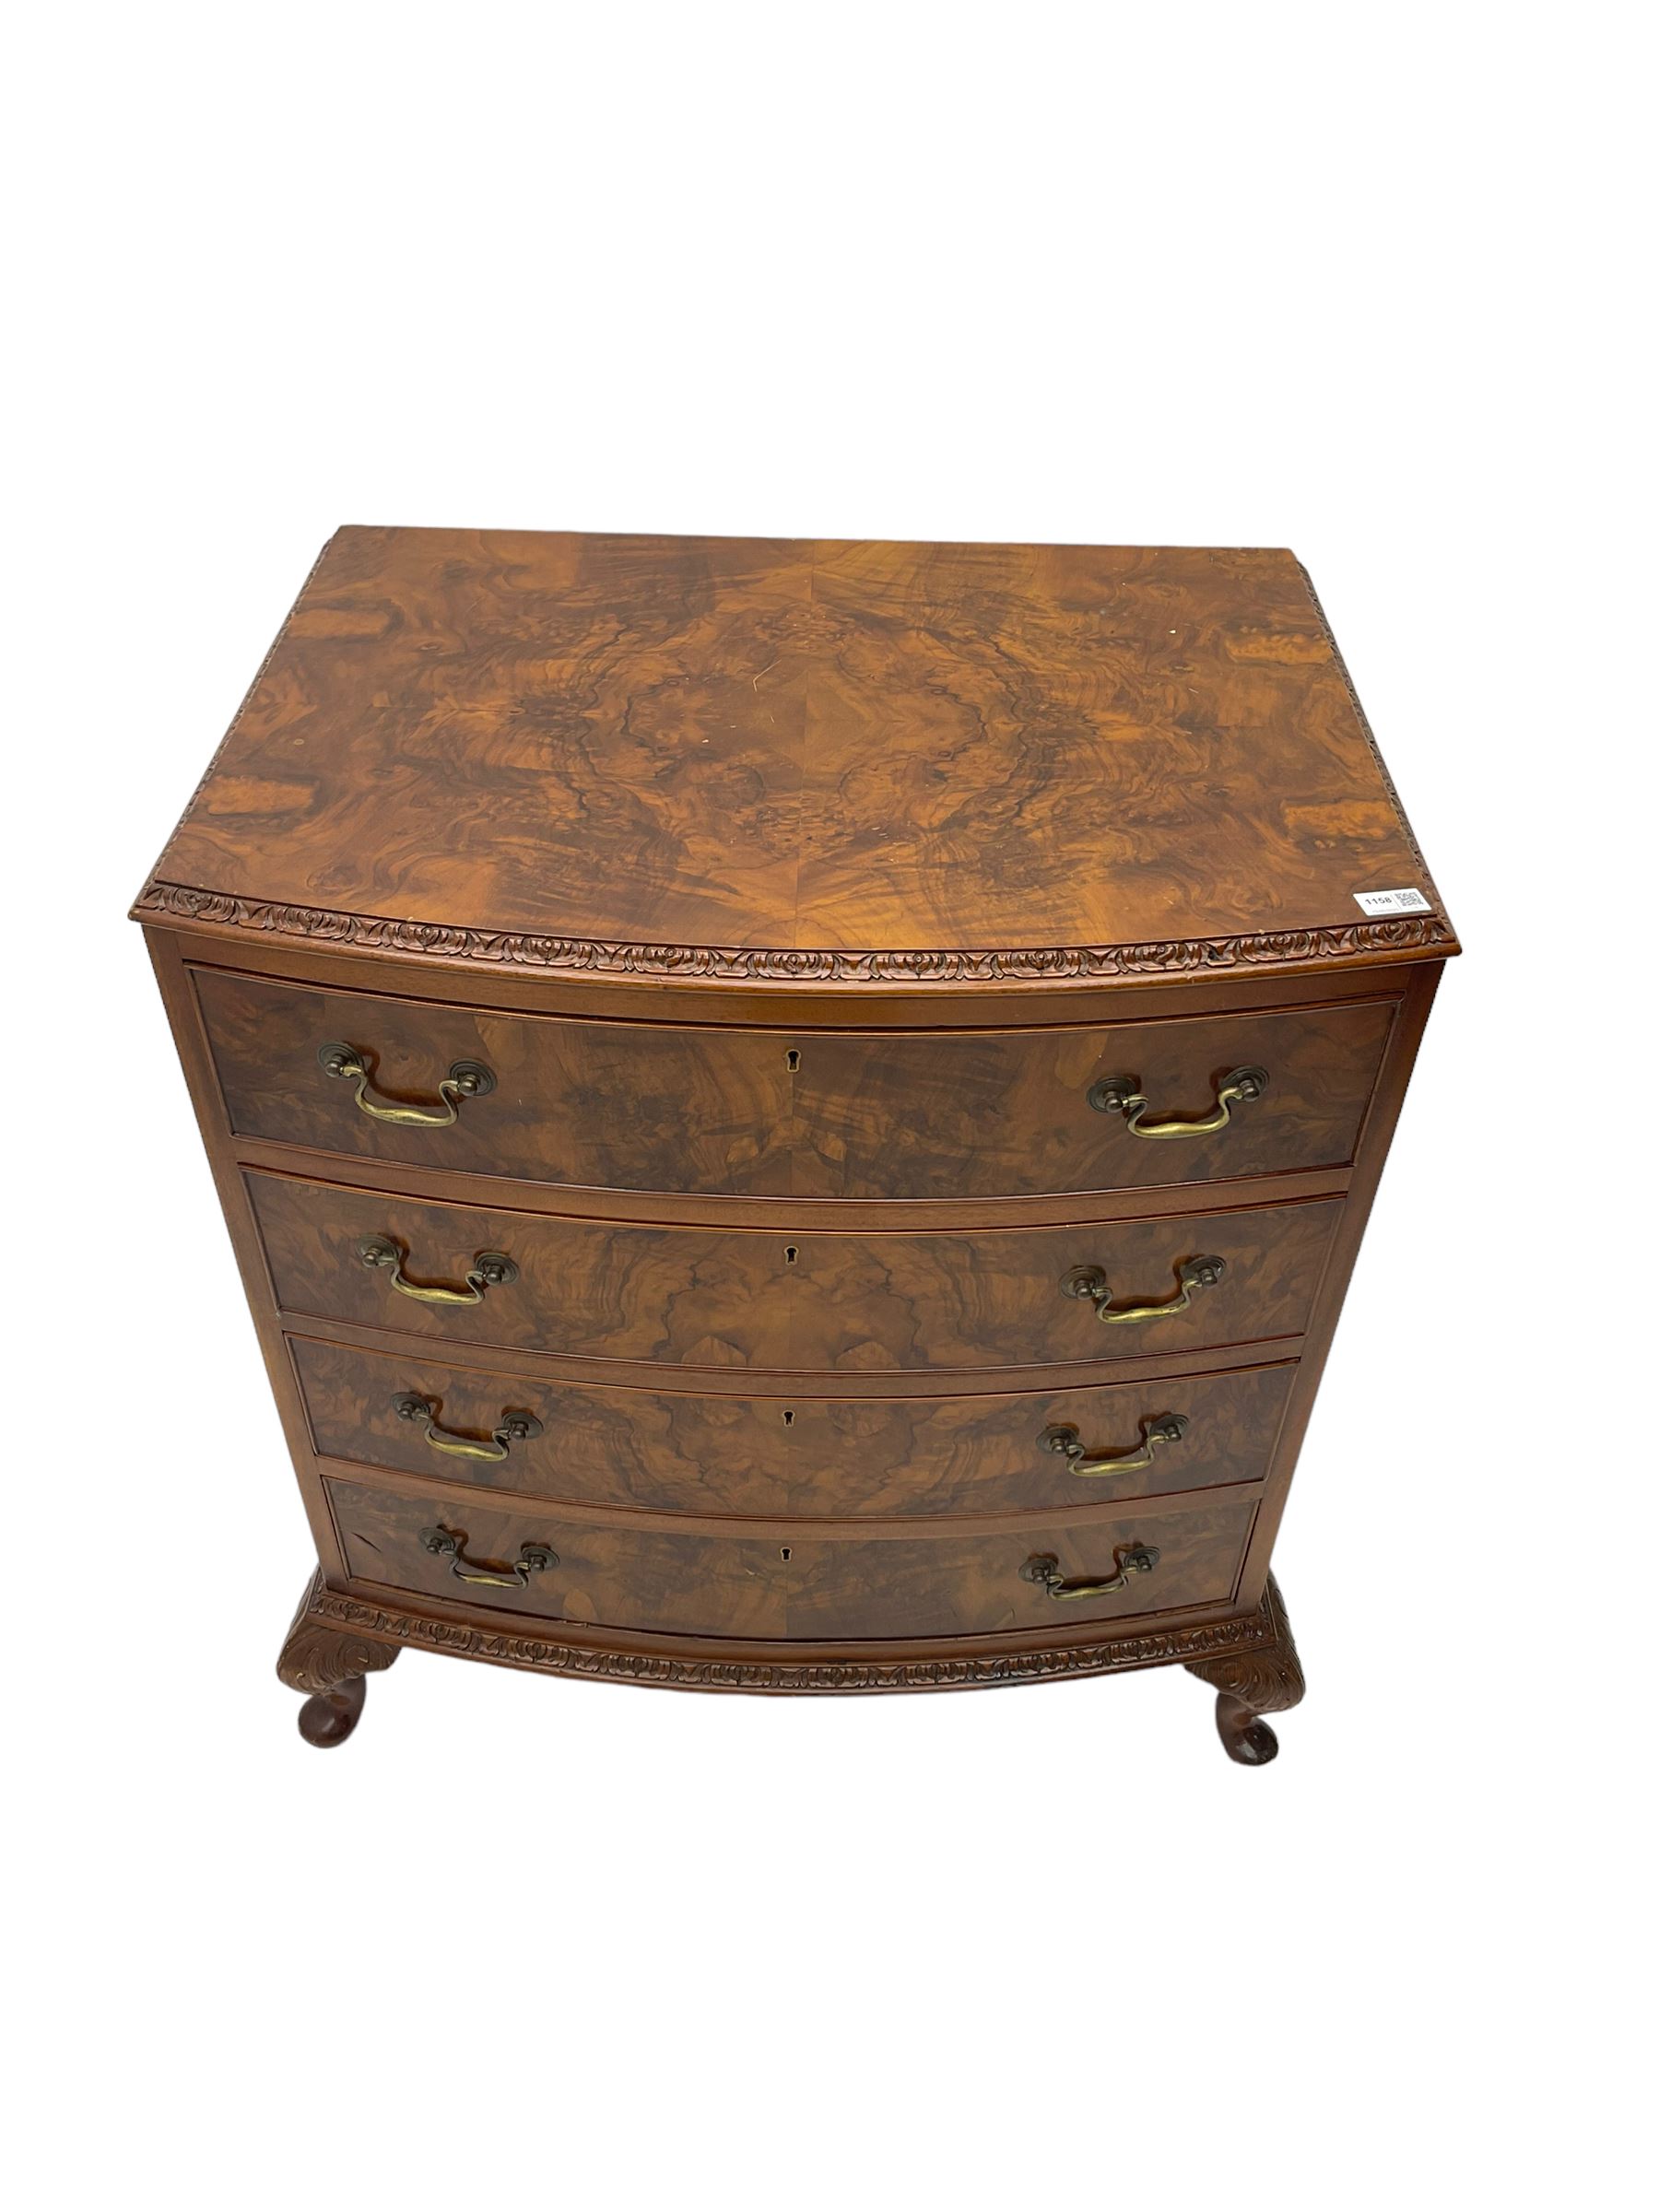 Mid-20th century walnut bow-front chest - Image 2 of 6